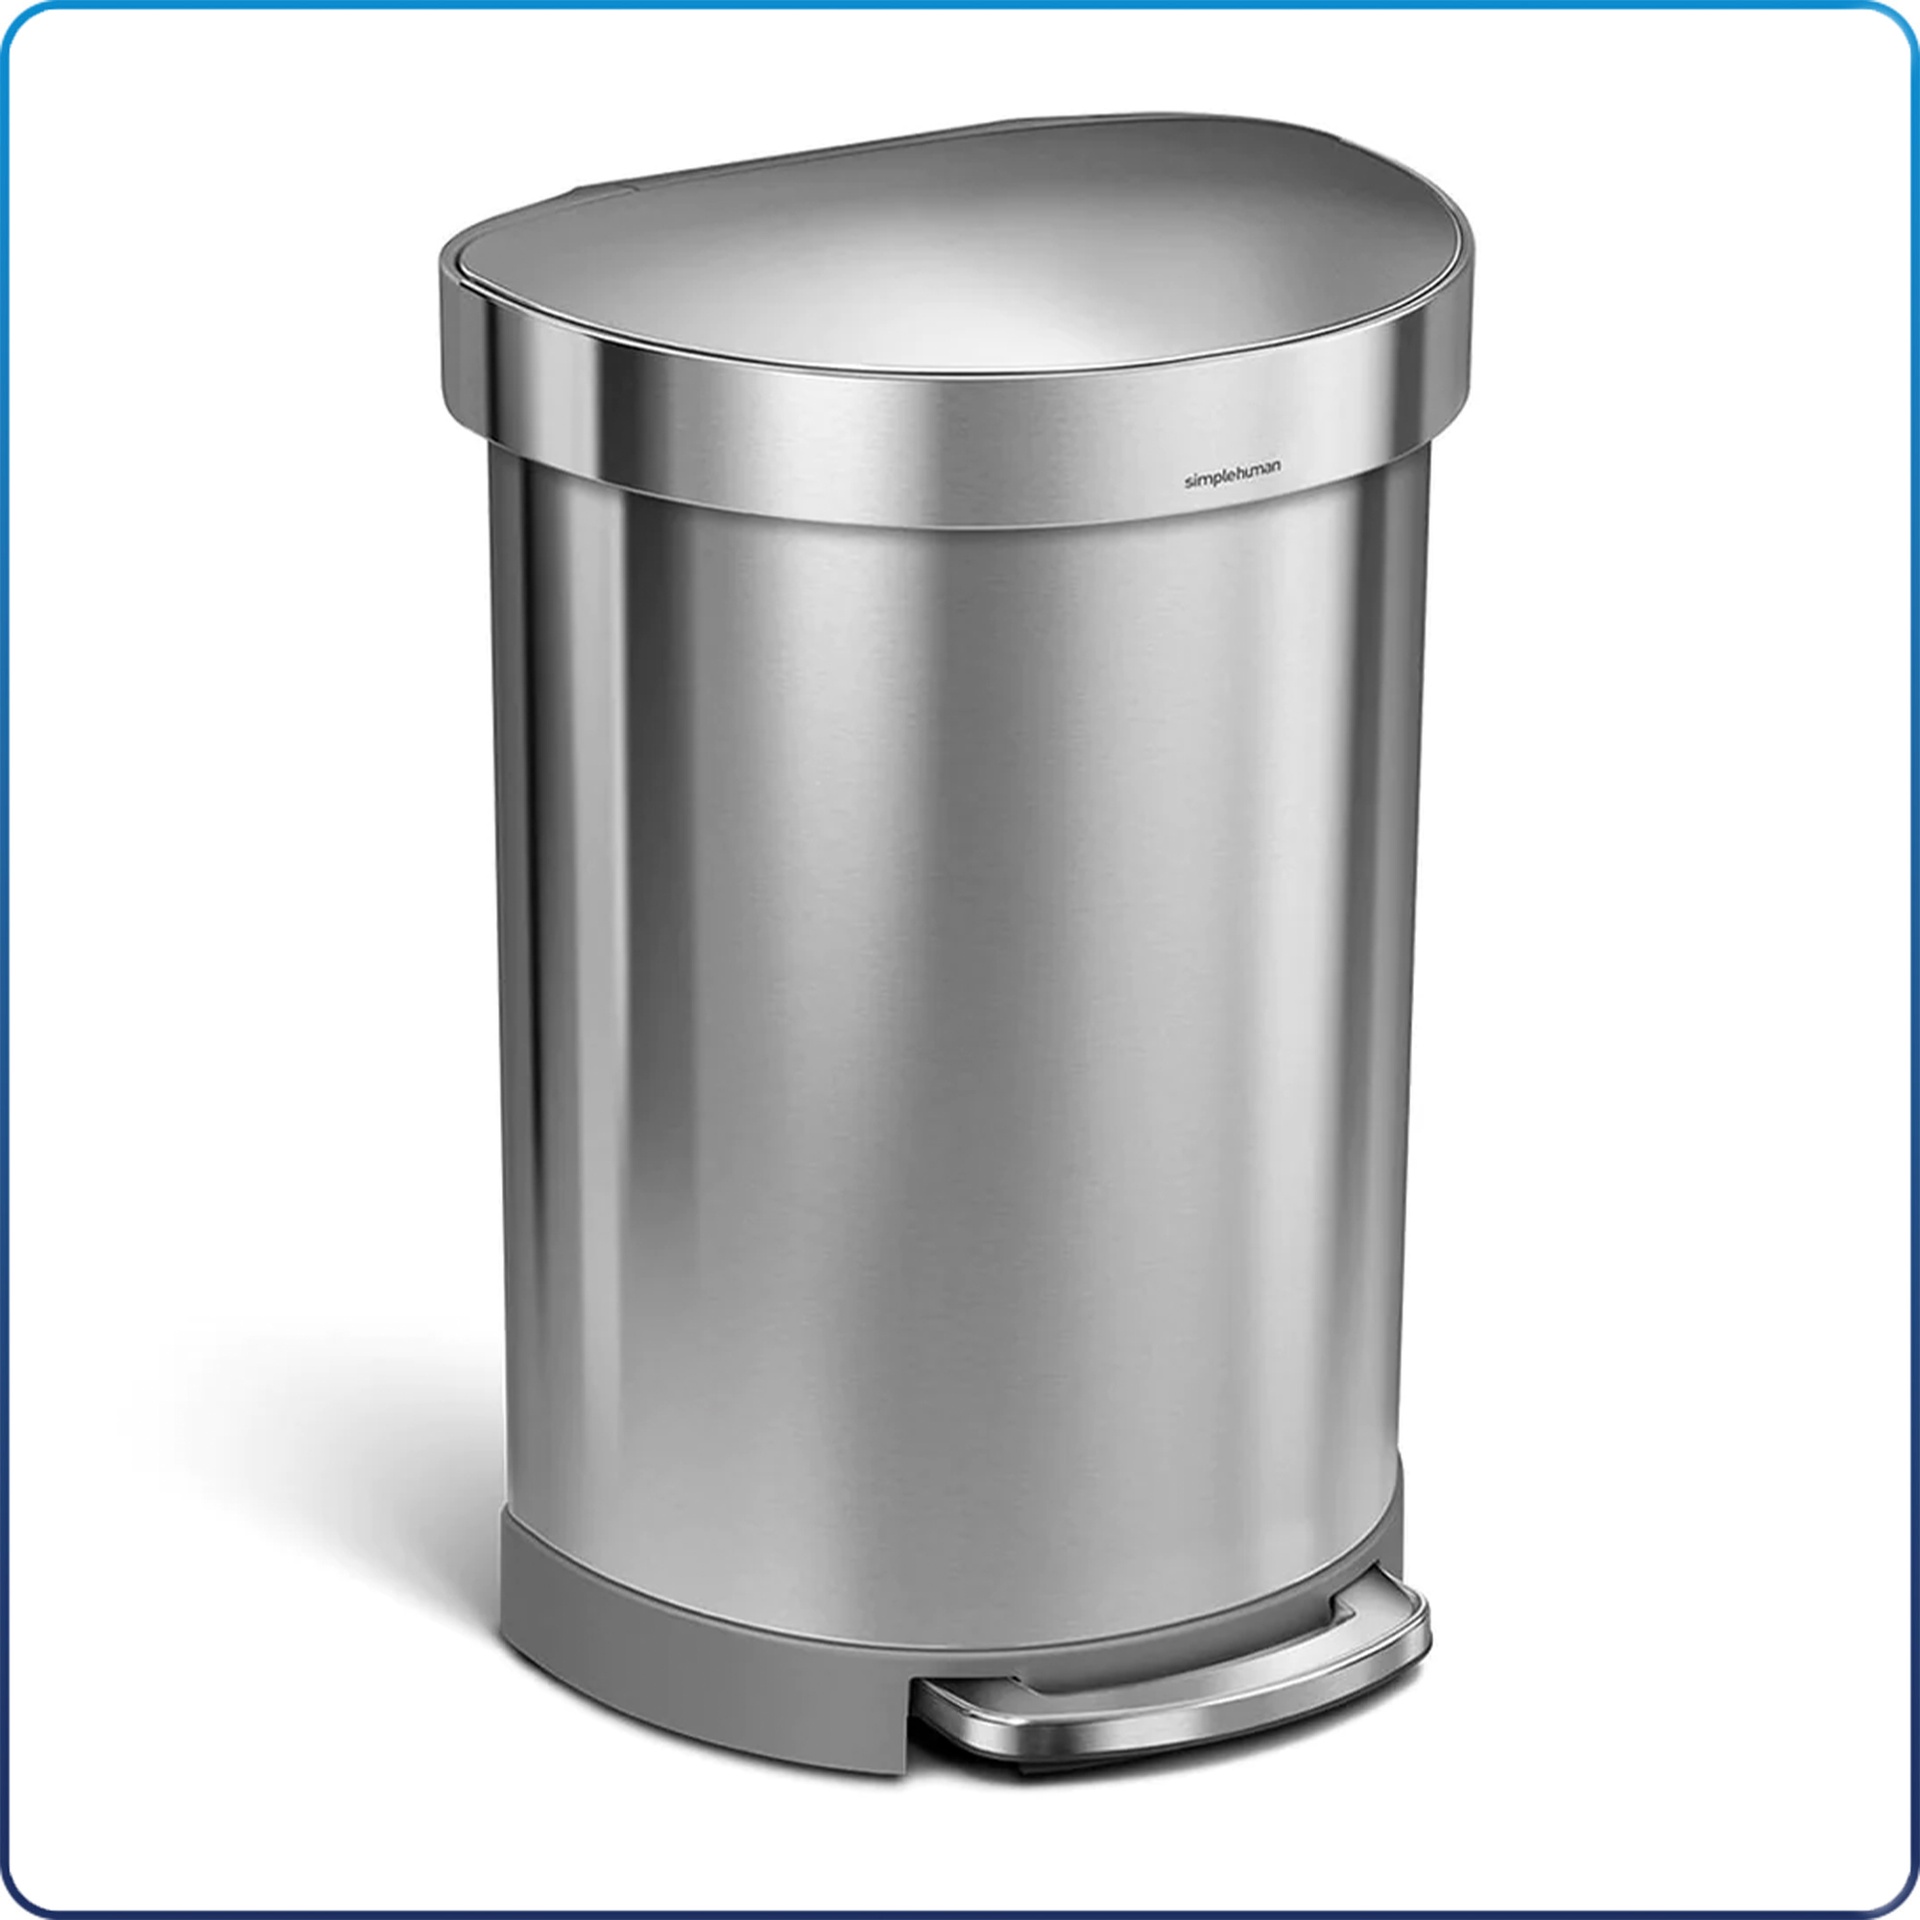 [4272243] 16 Gallon / 60 Liter Brushed Stainless Steel Semi-Round Step-On Trash Can